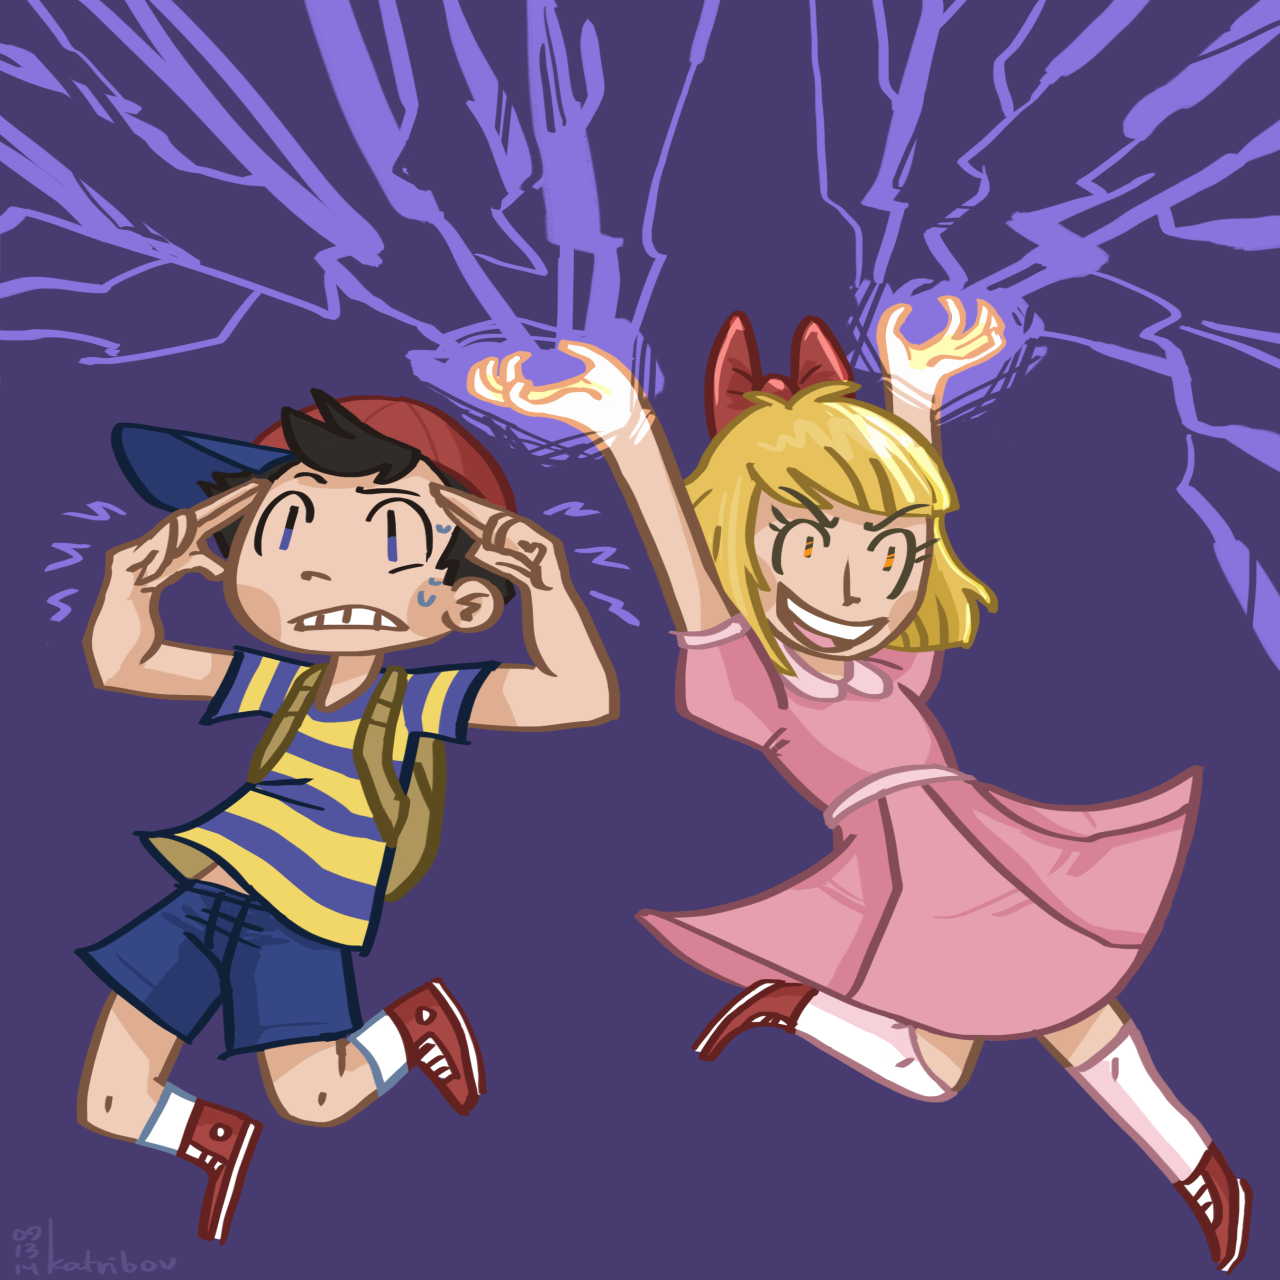 katribou:I imagine Paula would be happy to teach Ness some of her pk moves for smash